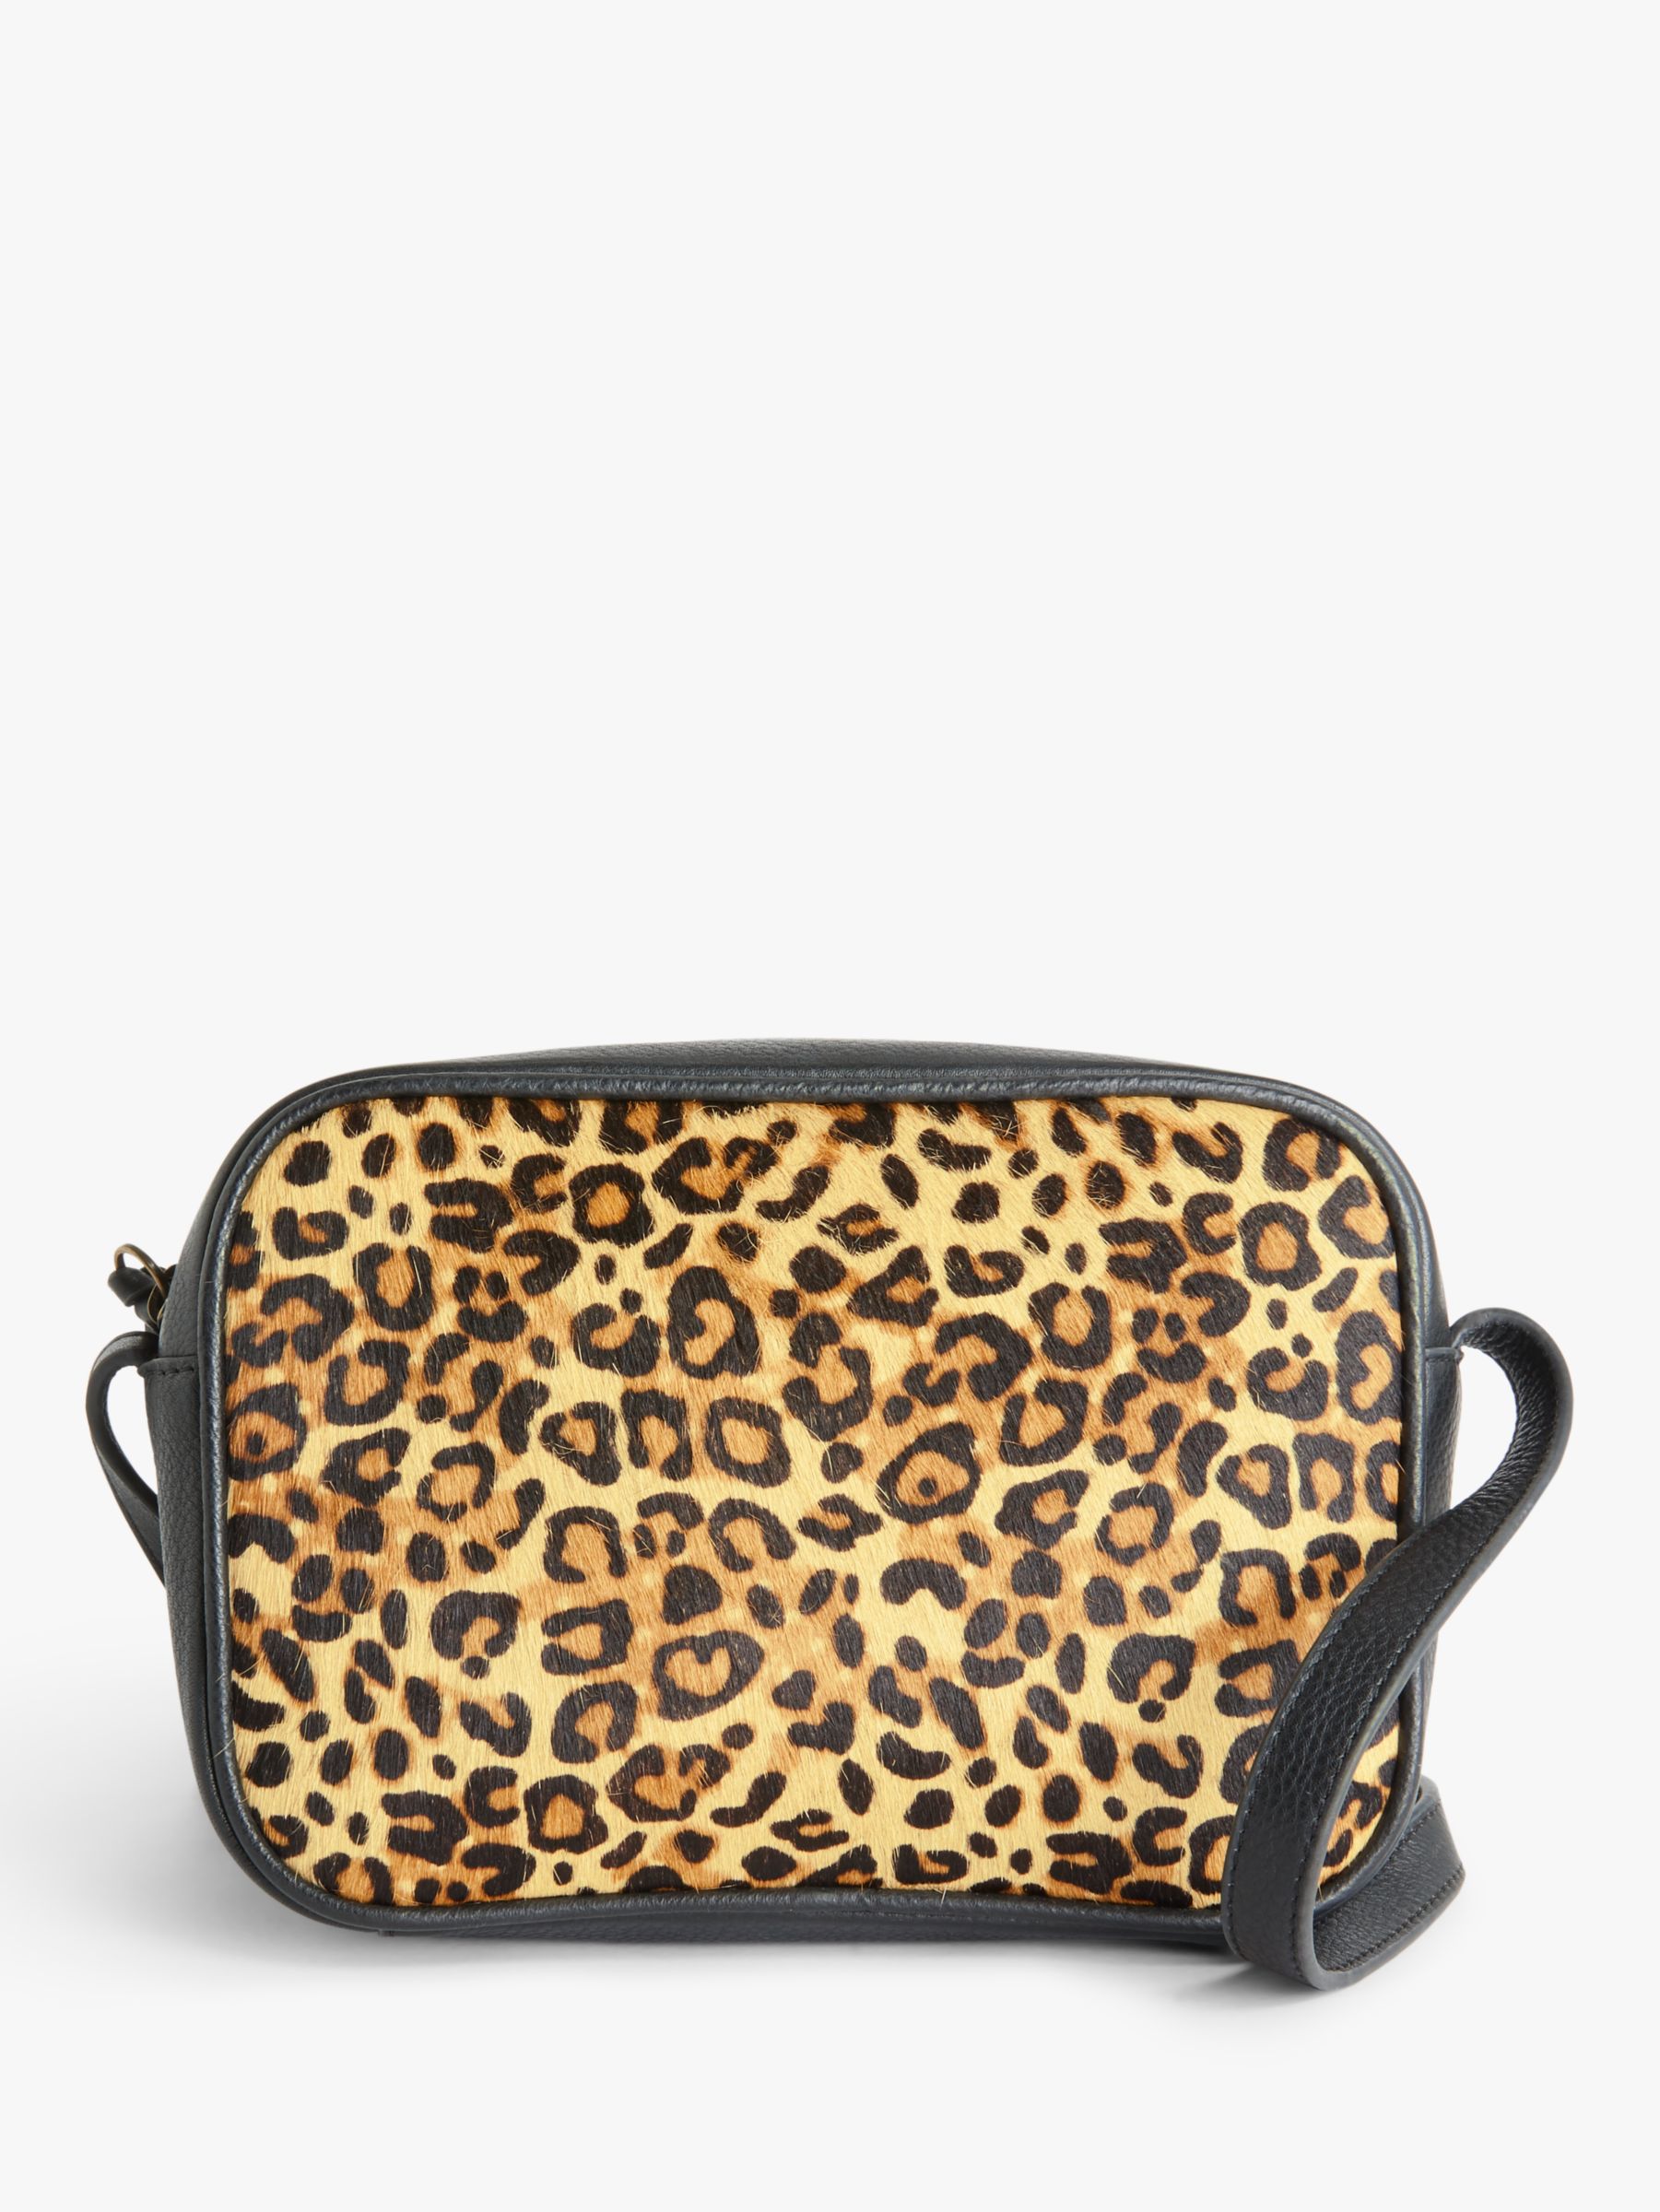 AND/OR Leopard Print Leather Camera Bag, Multi